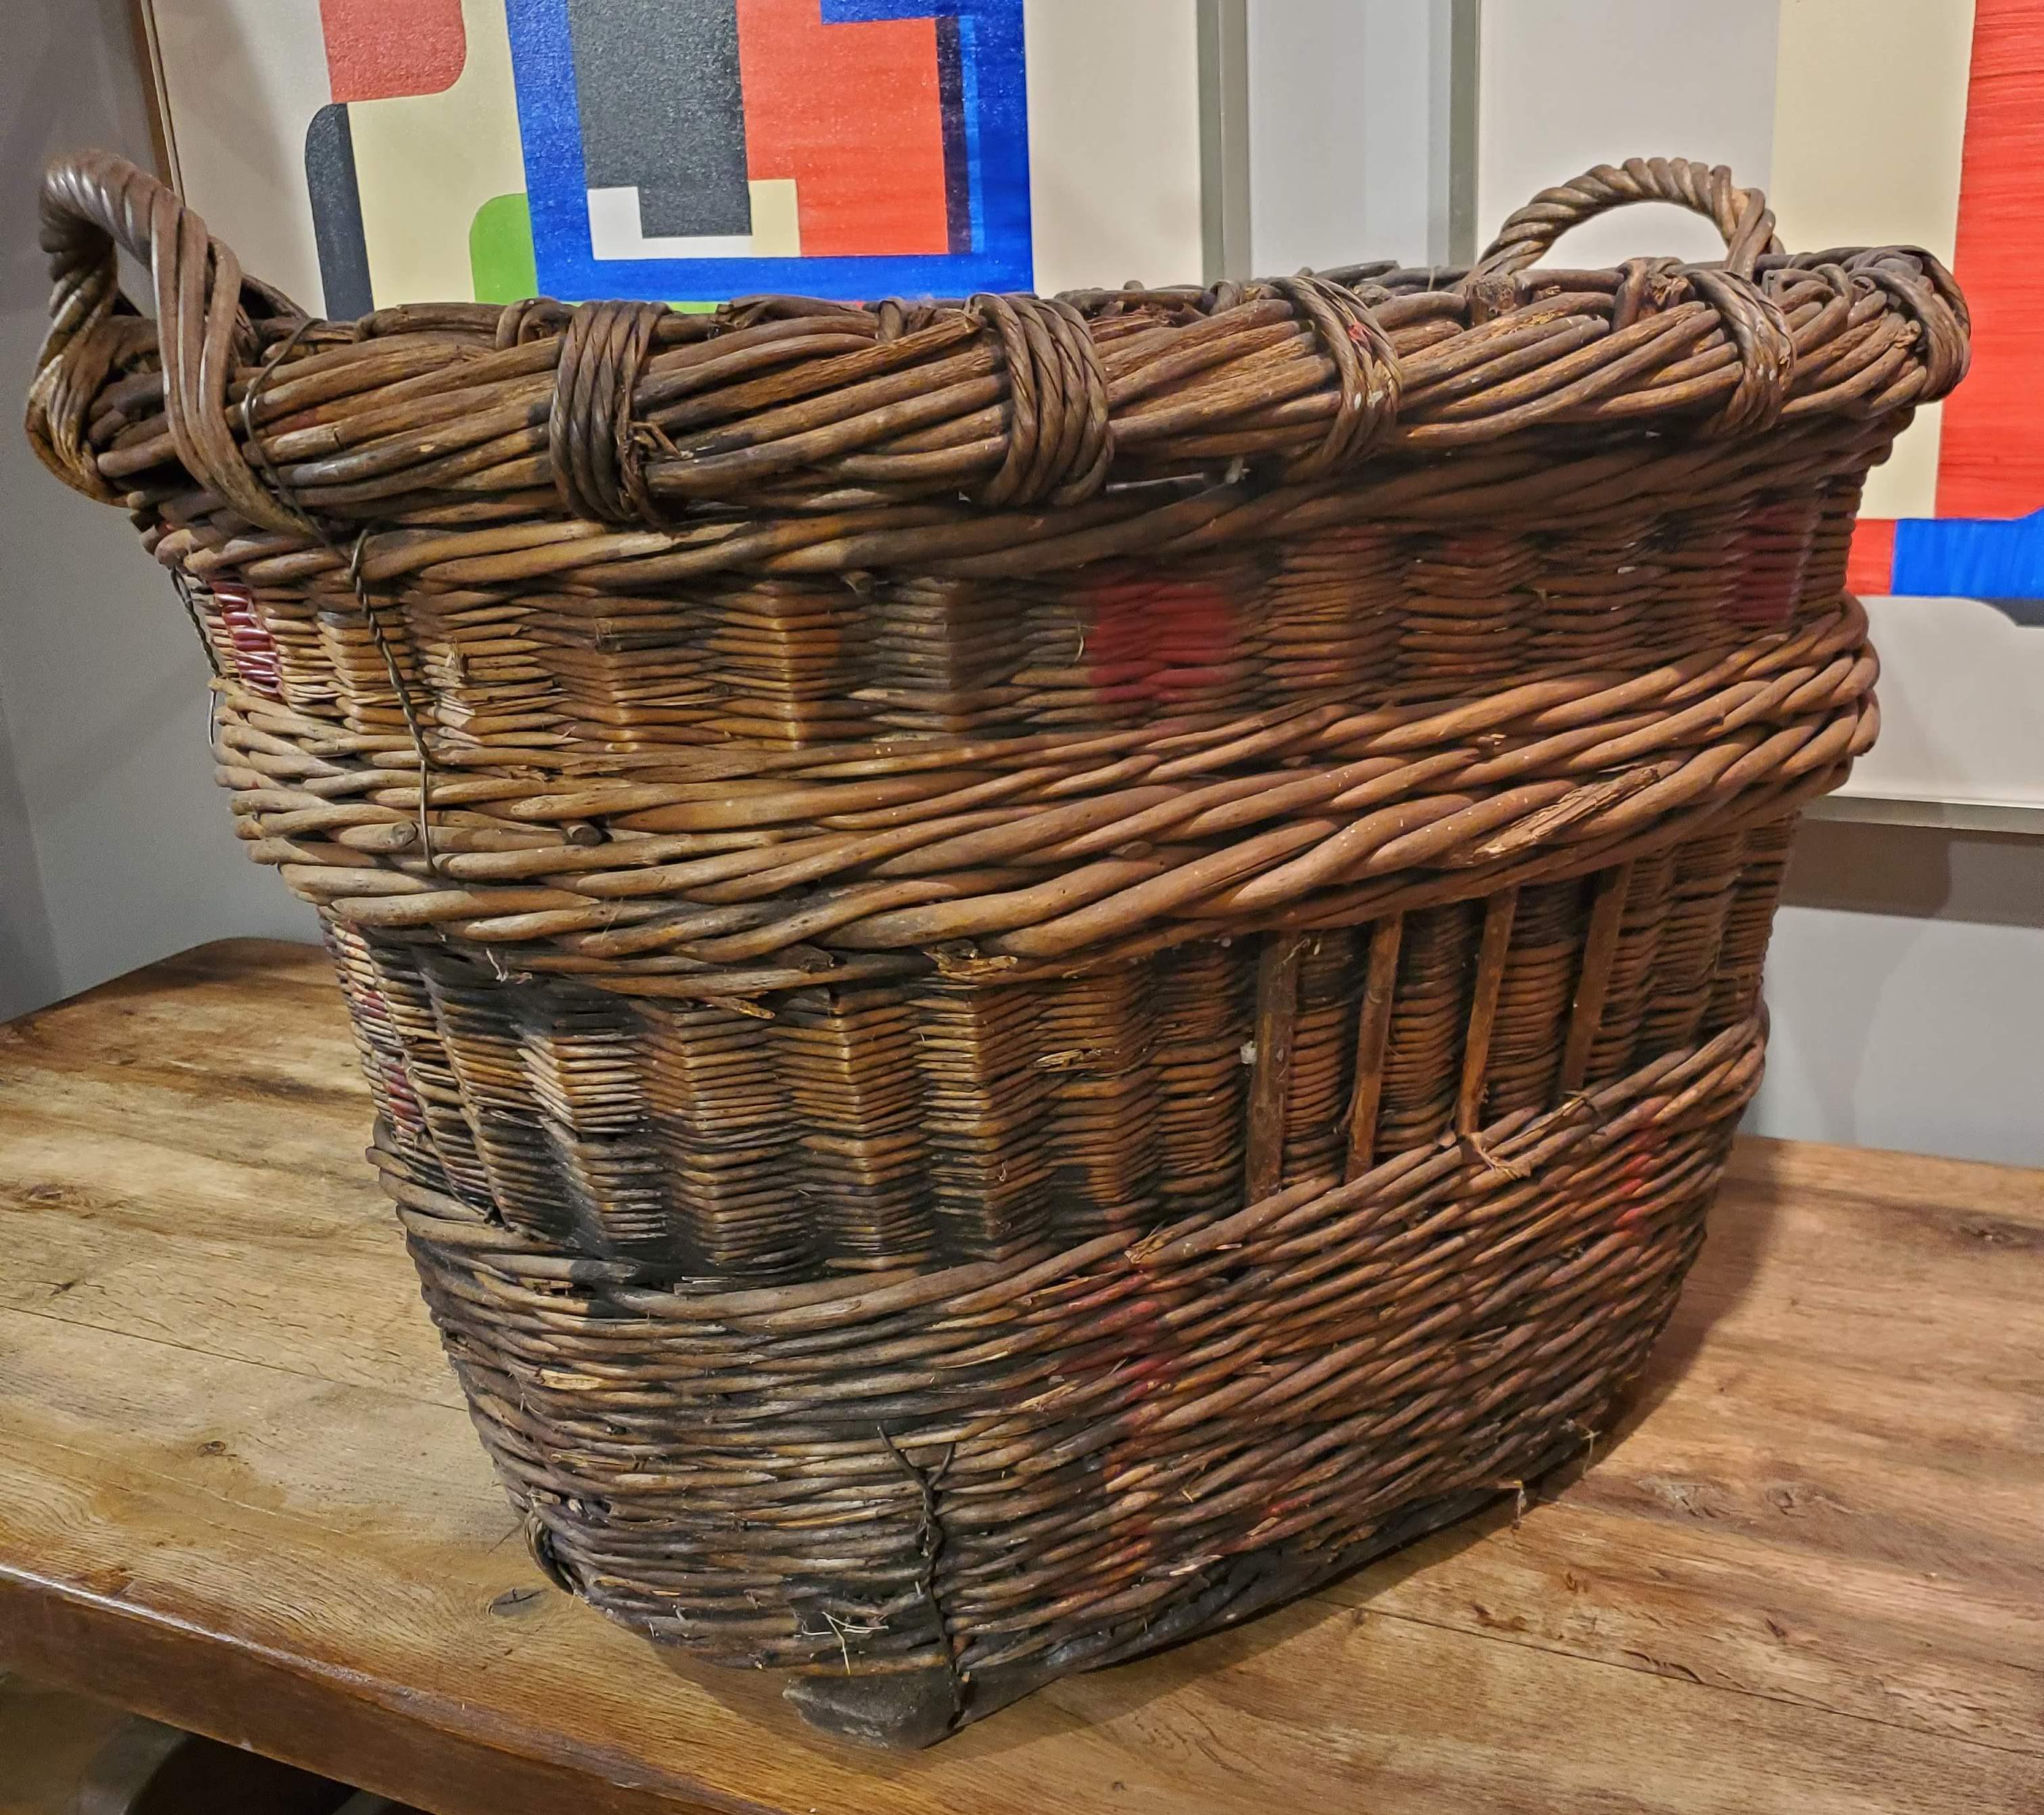 This lovely large French Provincial woven basket originally used for harvesting grapes is perfect to add additional storage to your room. Use it for pillows or extra blankets for guests. Great rustic appeal. (Pillows pictured not